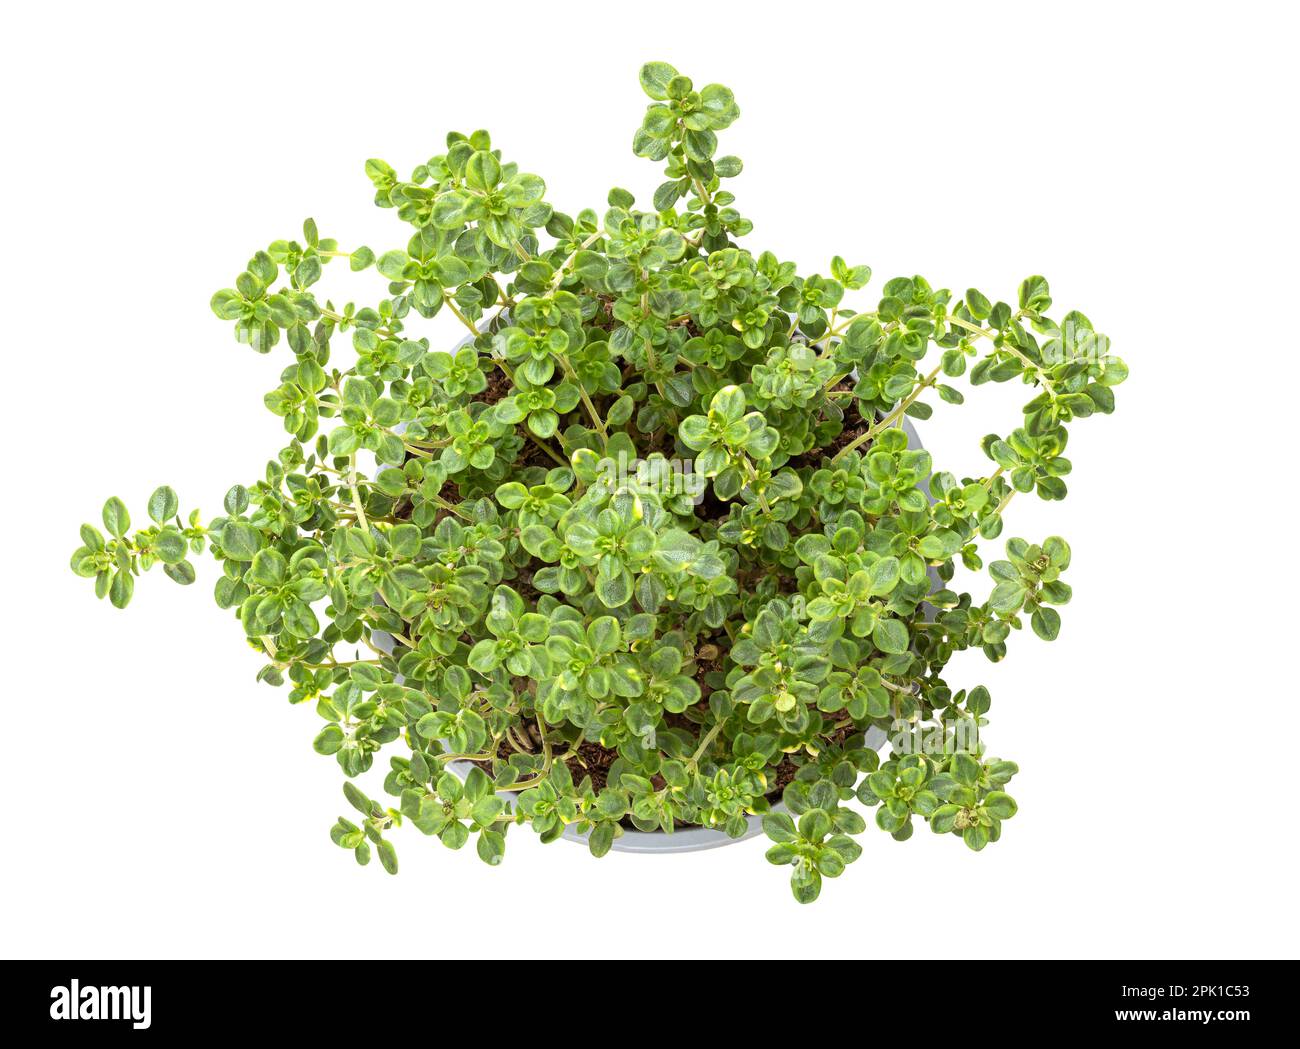 Lemon thyme, young plant in gray plastic pot. Thymus citriodorus, also known as citrus thyme. Lemon-scented medicinal and culinary herb. Stock Photo